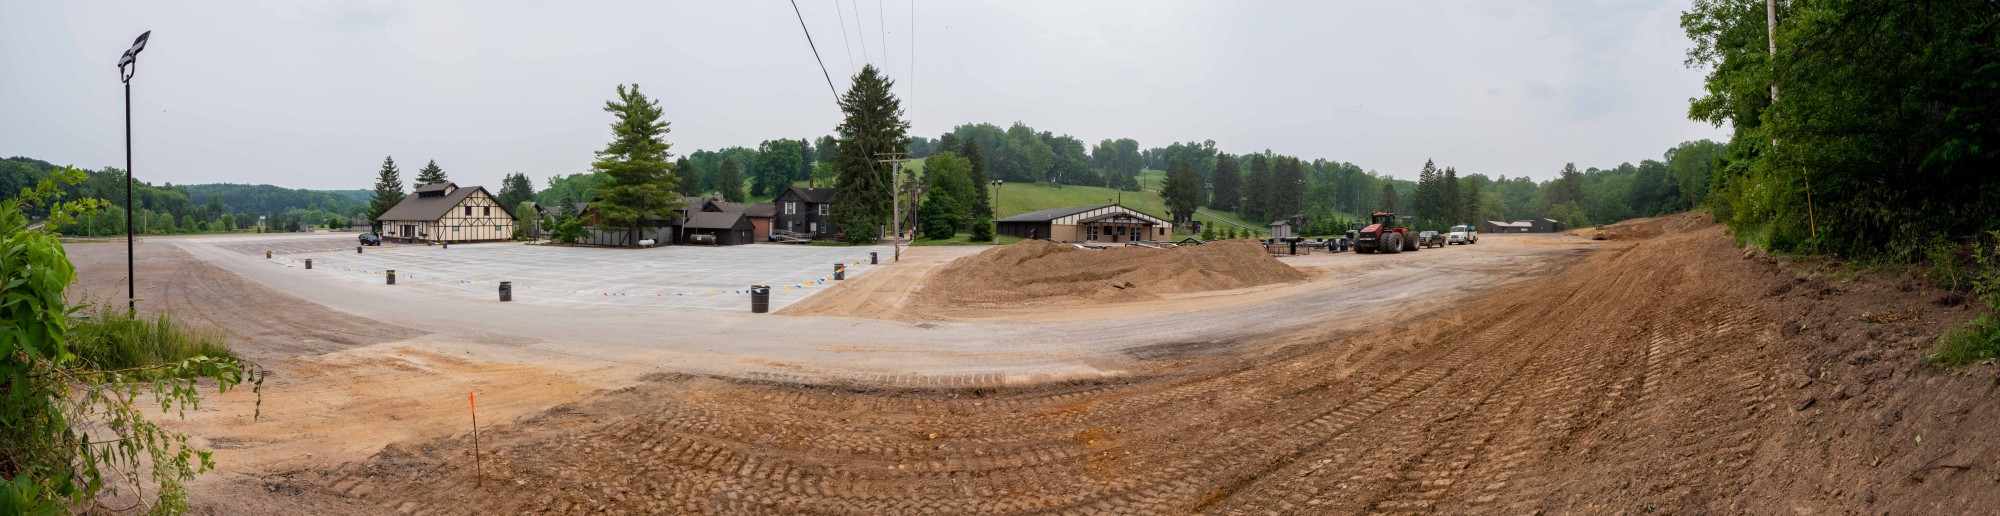 West Parking Lot Expansion at Snow Trails in Ohio